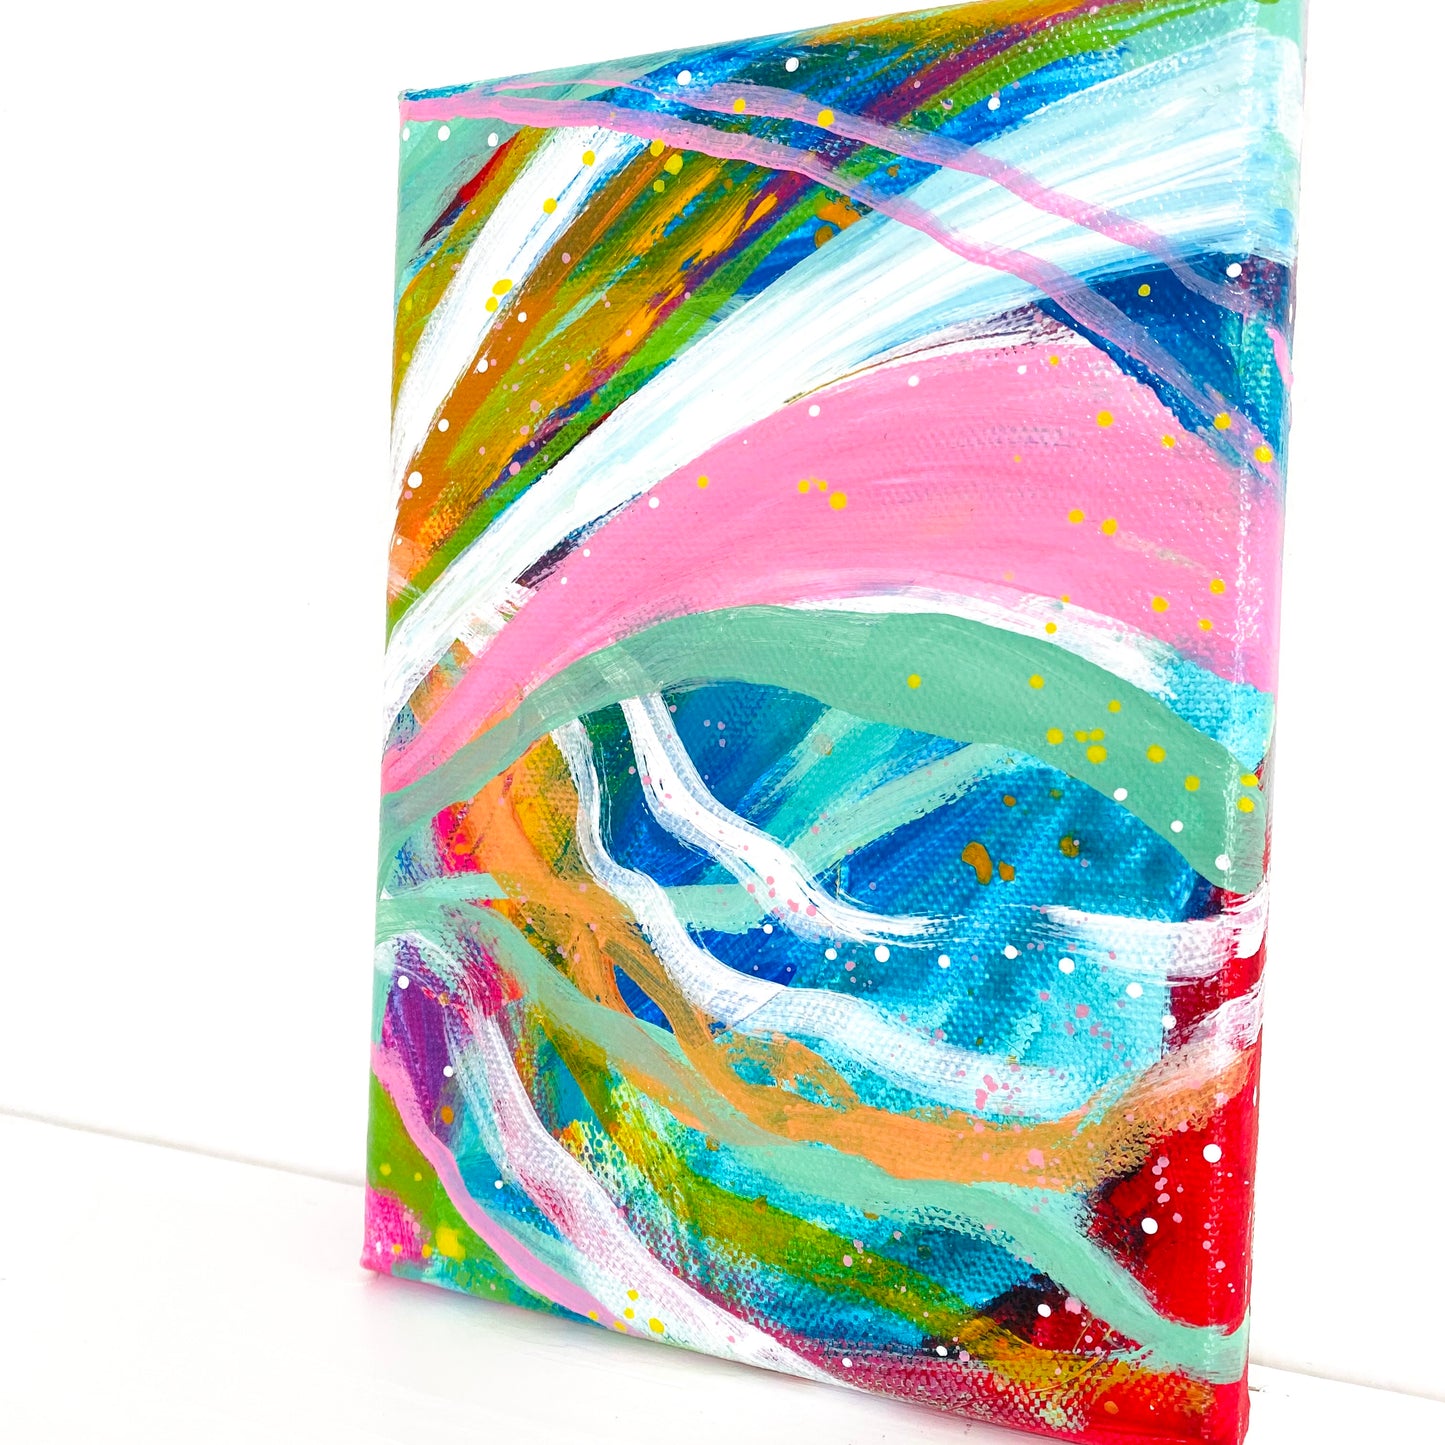 Waves of Color #4 5x7 inch abstract original canvas